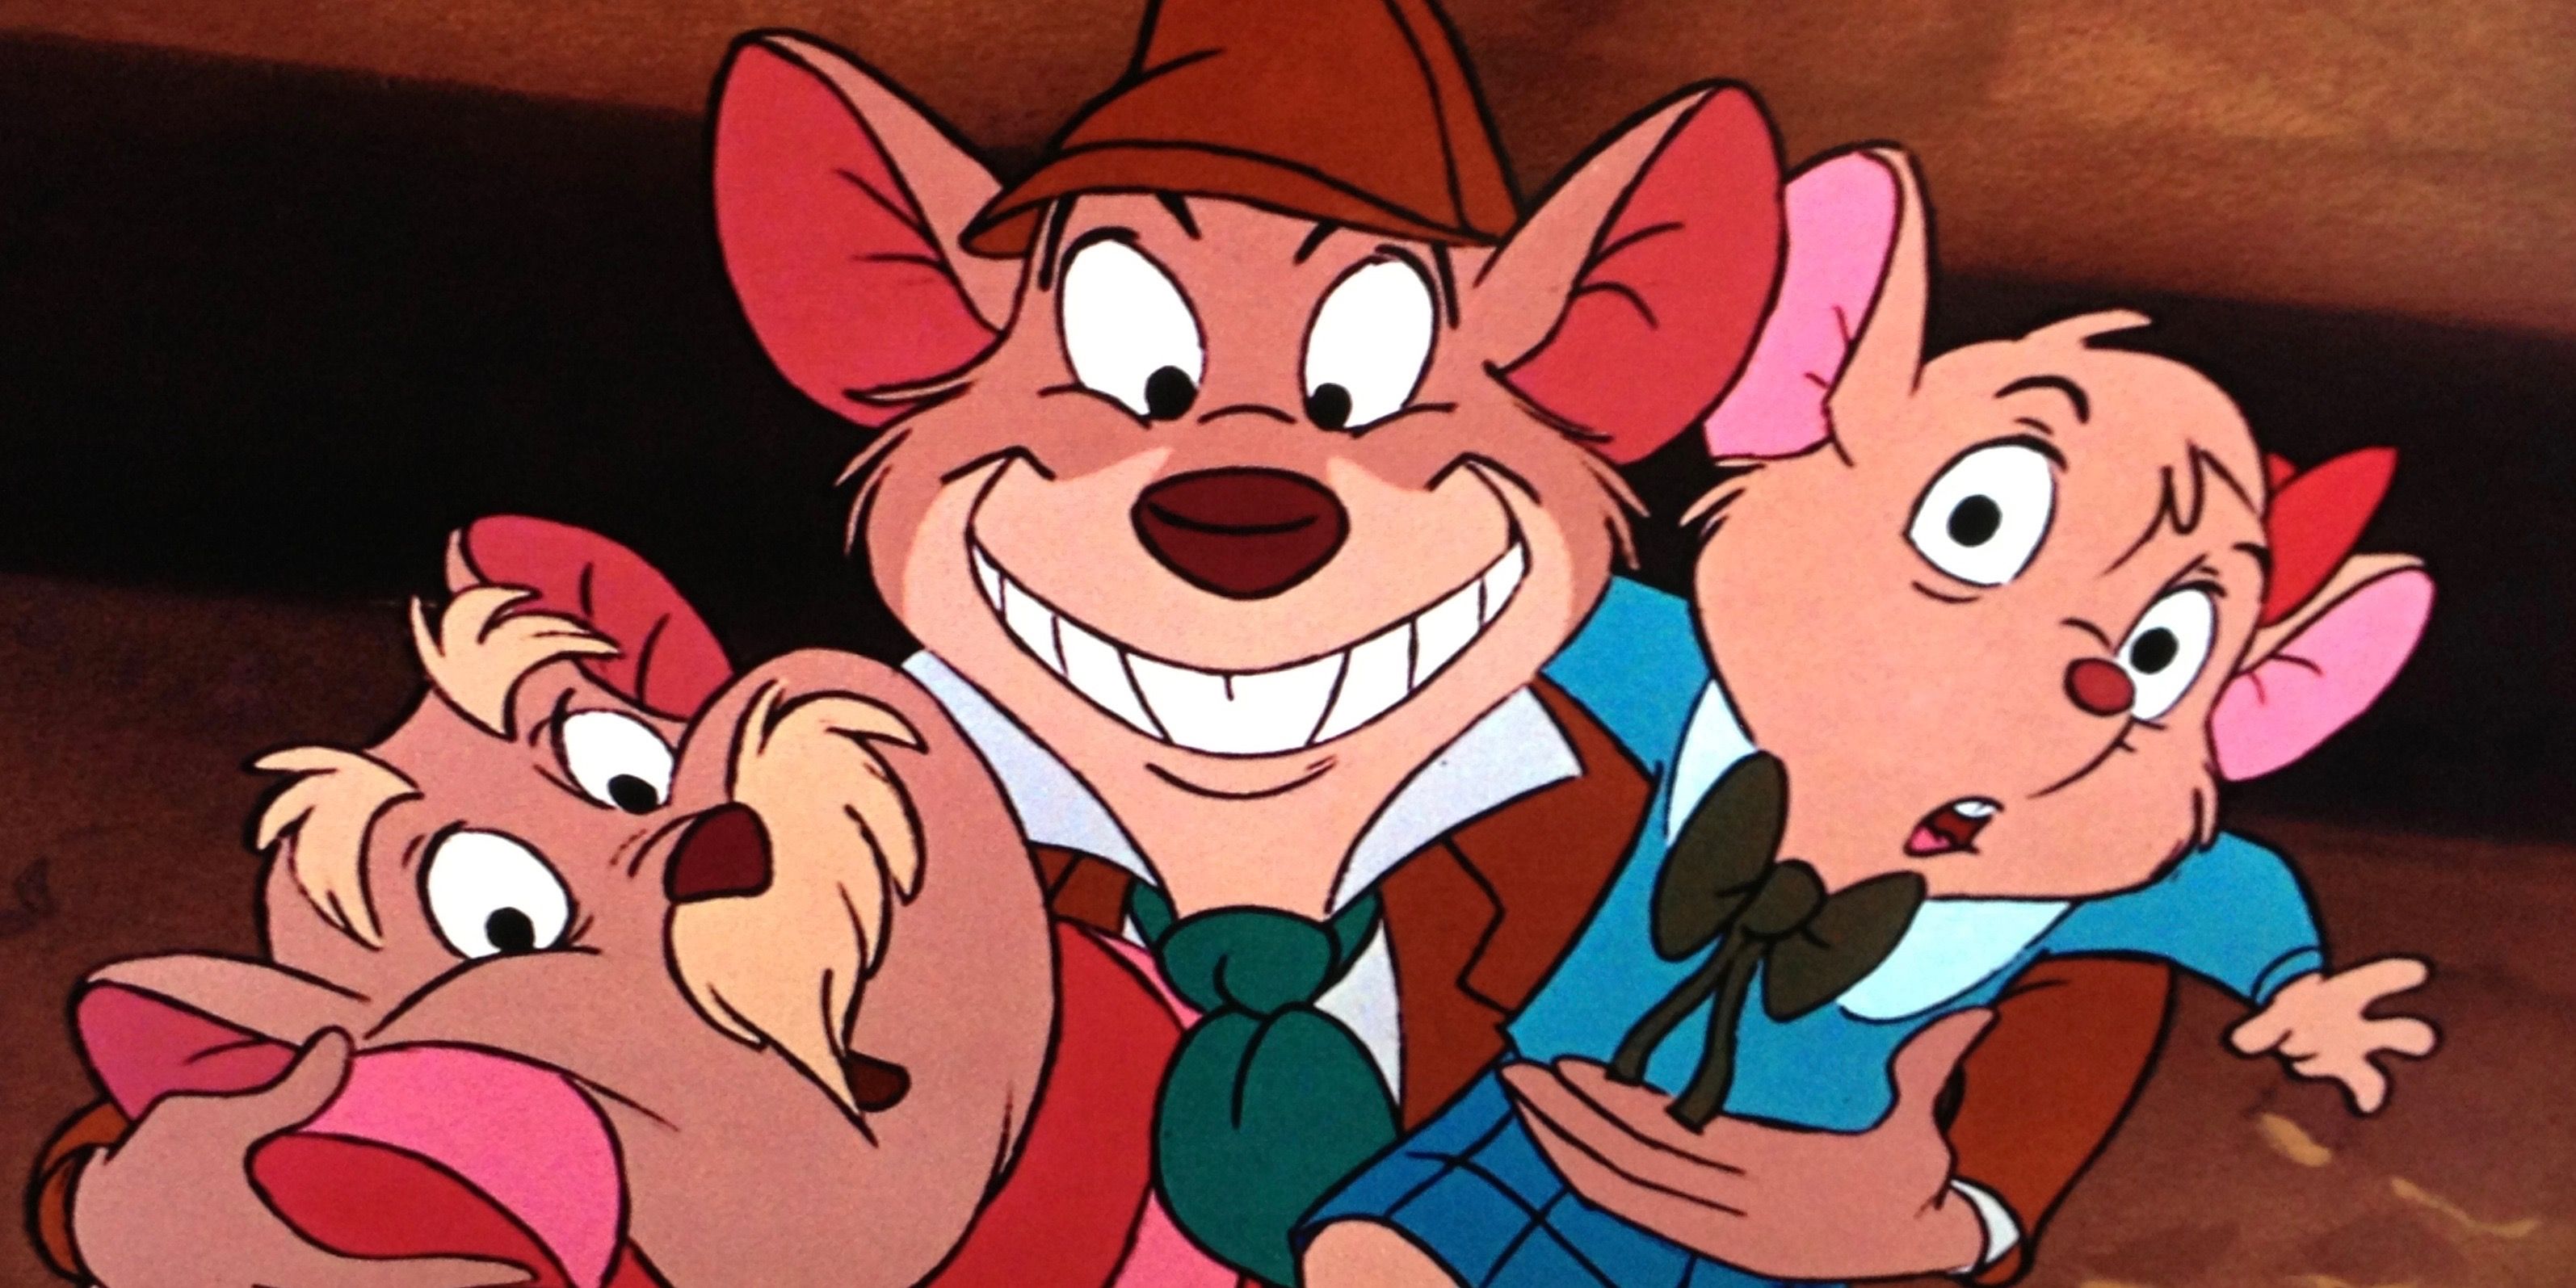 5. "The Great Mouse Detective" - wide 3